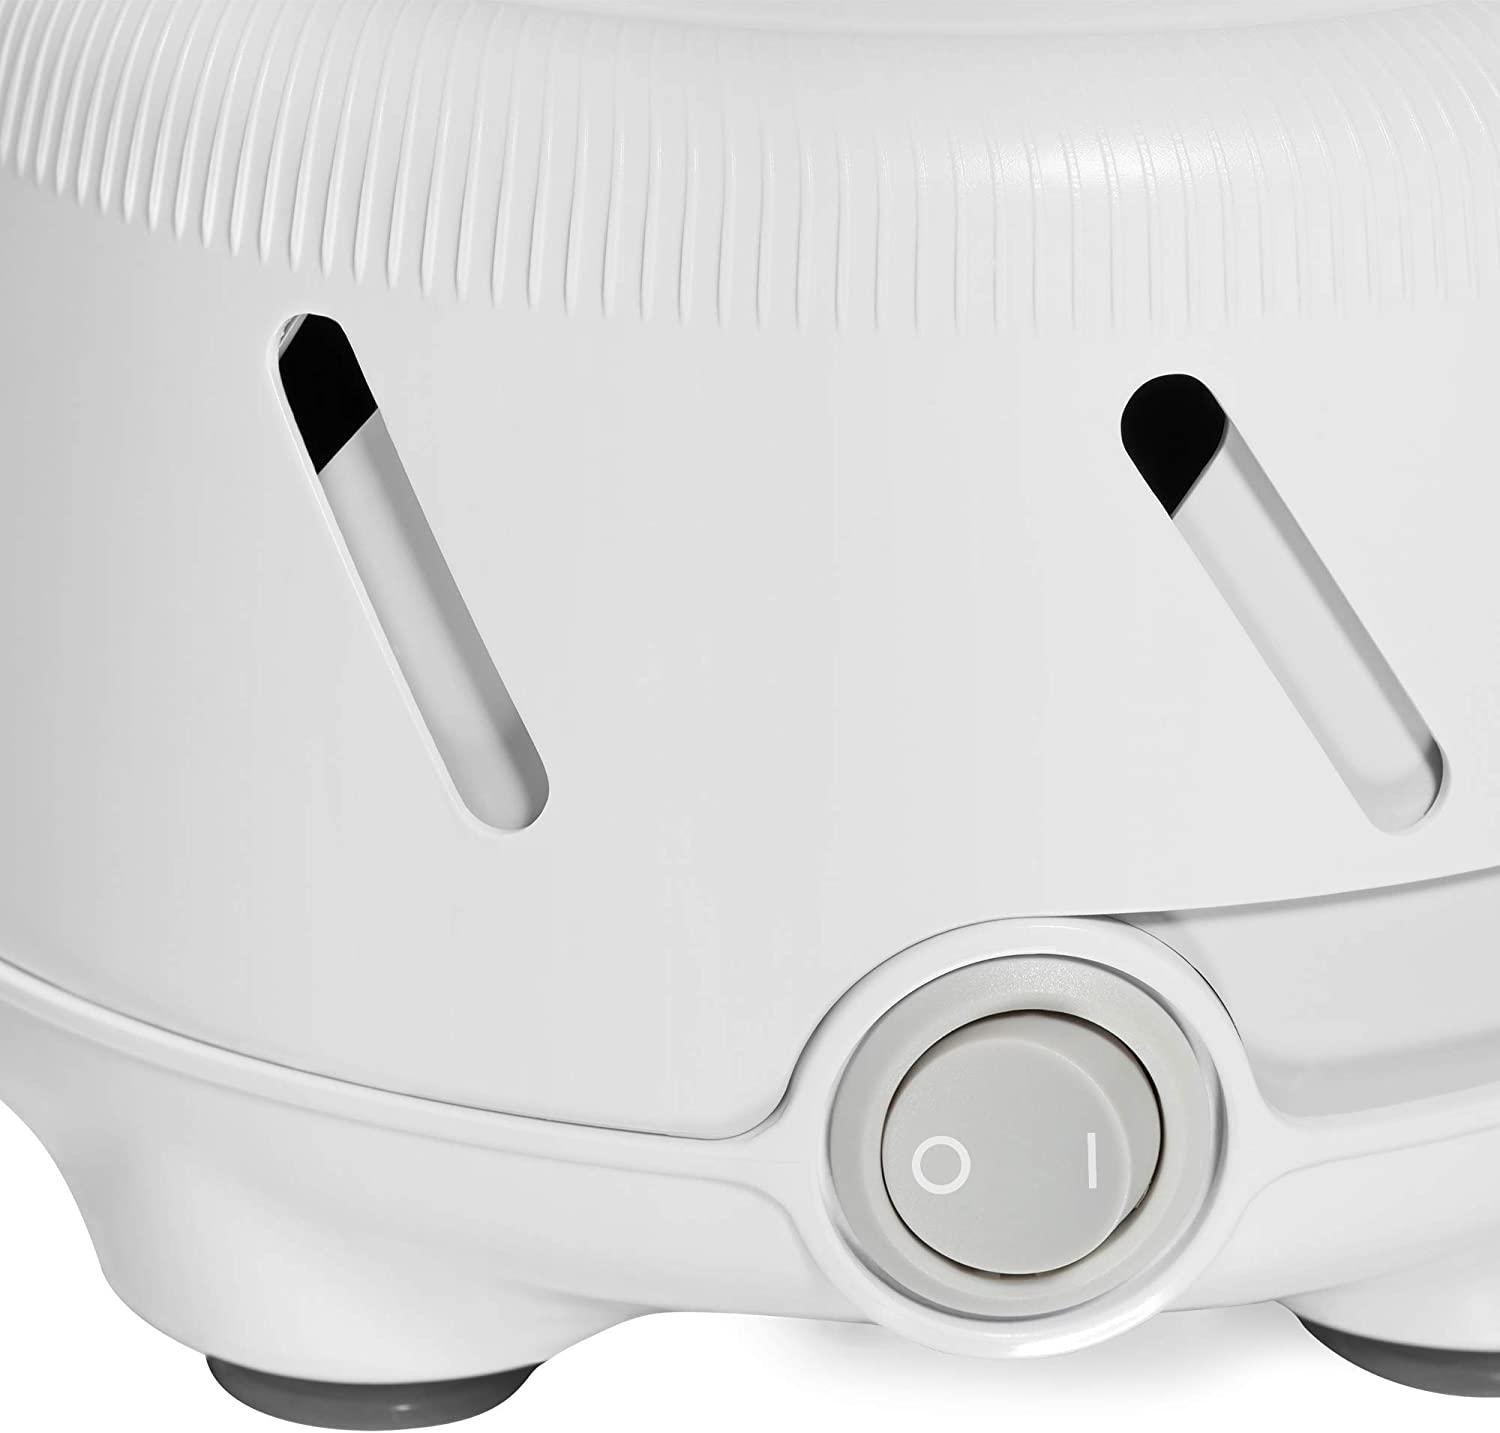 How to Use a White Noise Machine for Privacy